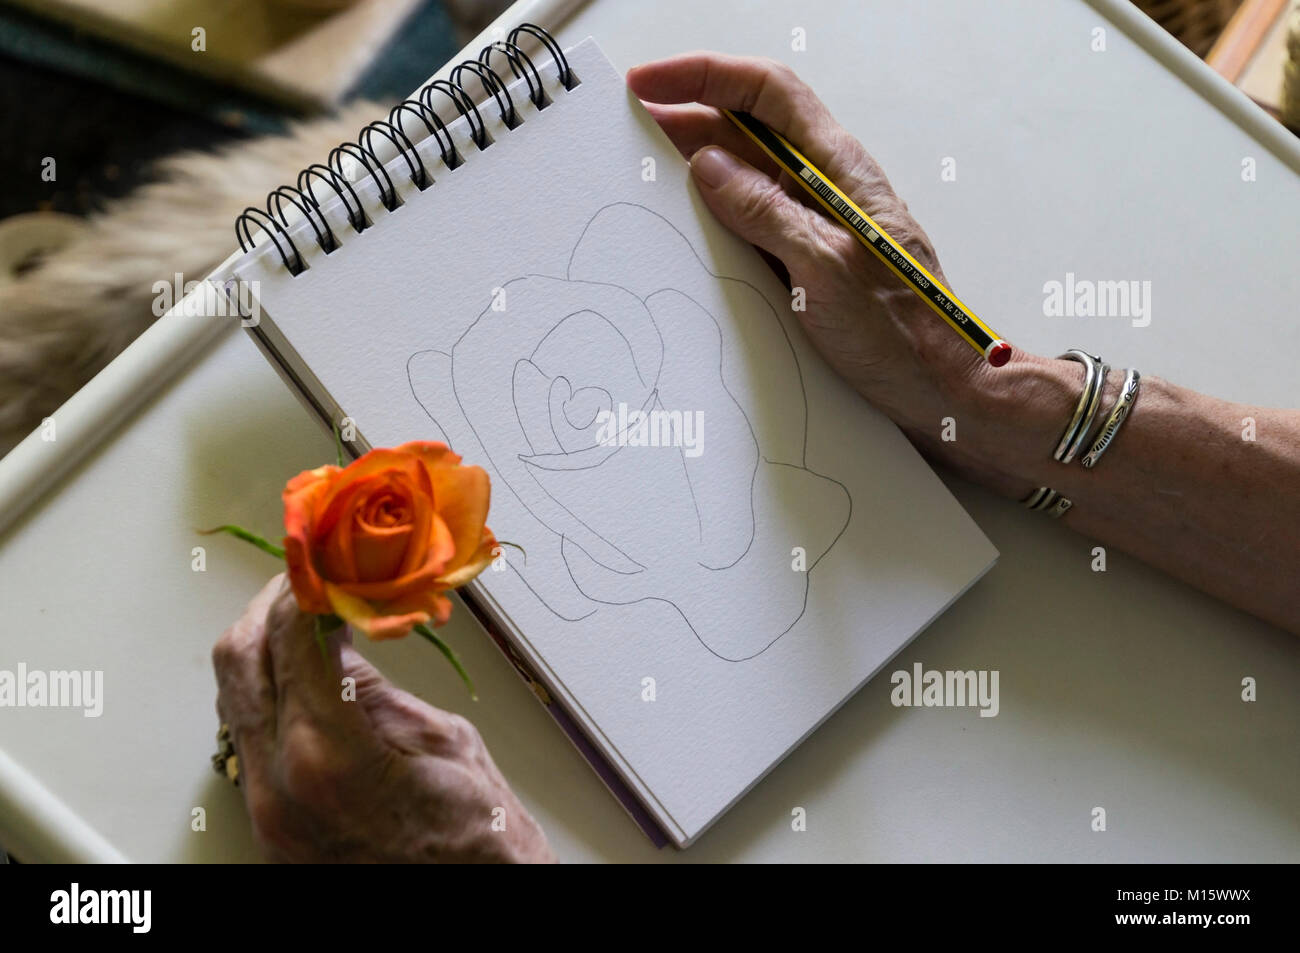 Learning to draw - sketching a rose. Stock Photo